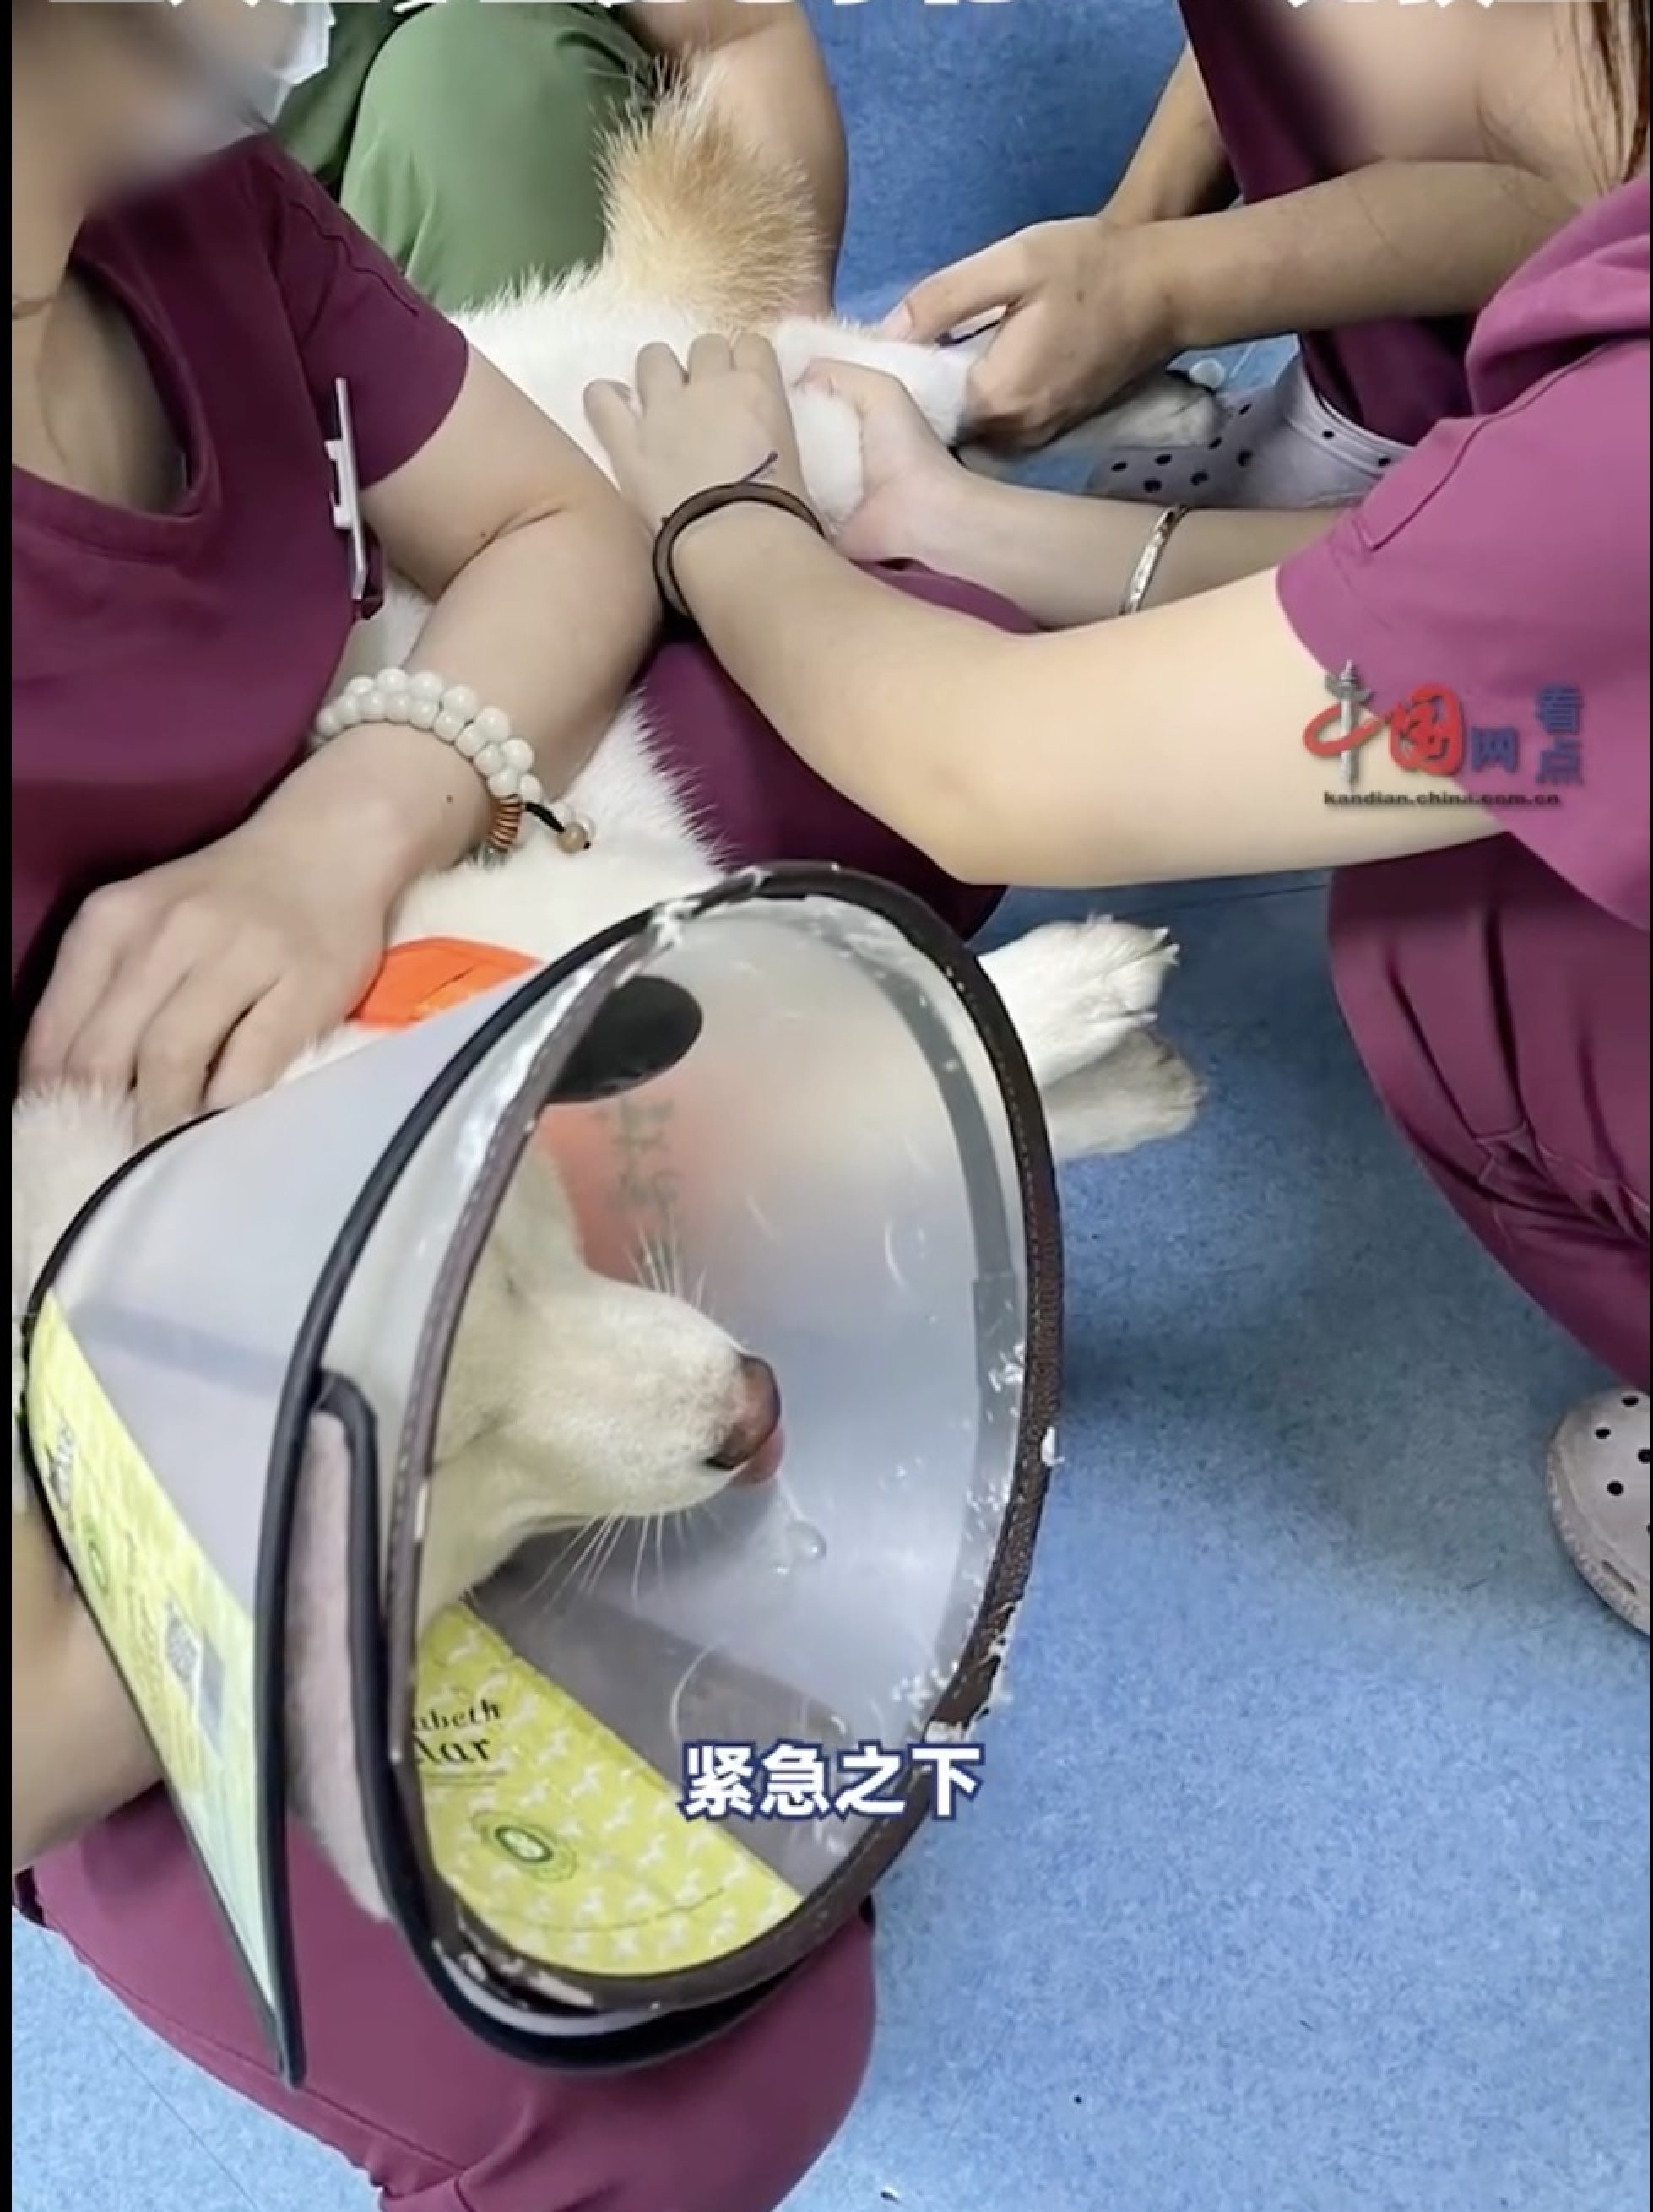 The attending vet said Liu’s decision to induce her dog to vomit had prevented more severe or deadly complications. Photo: Weibo